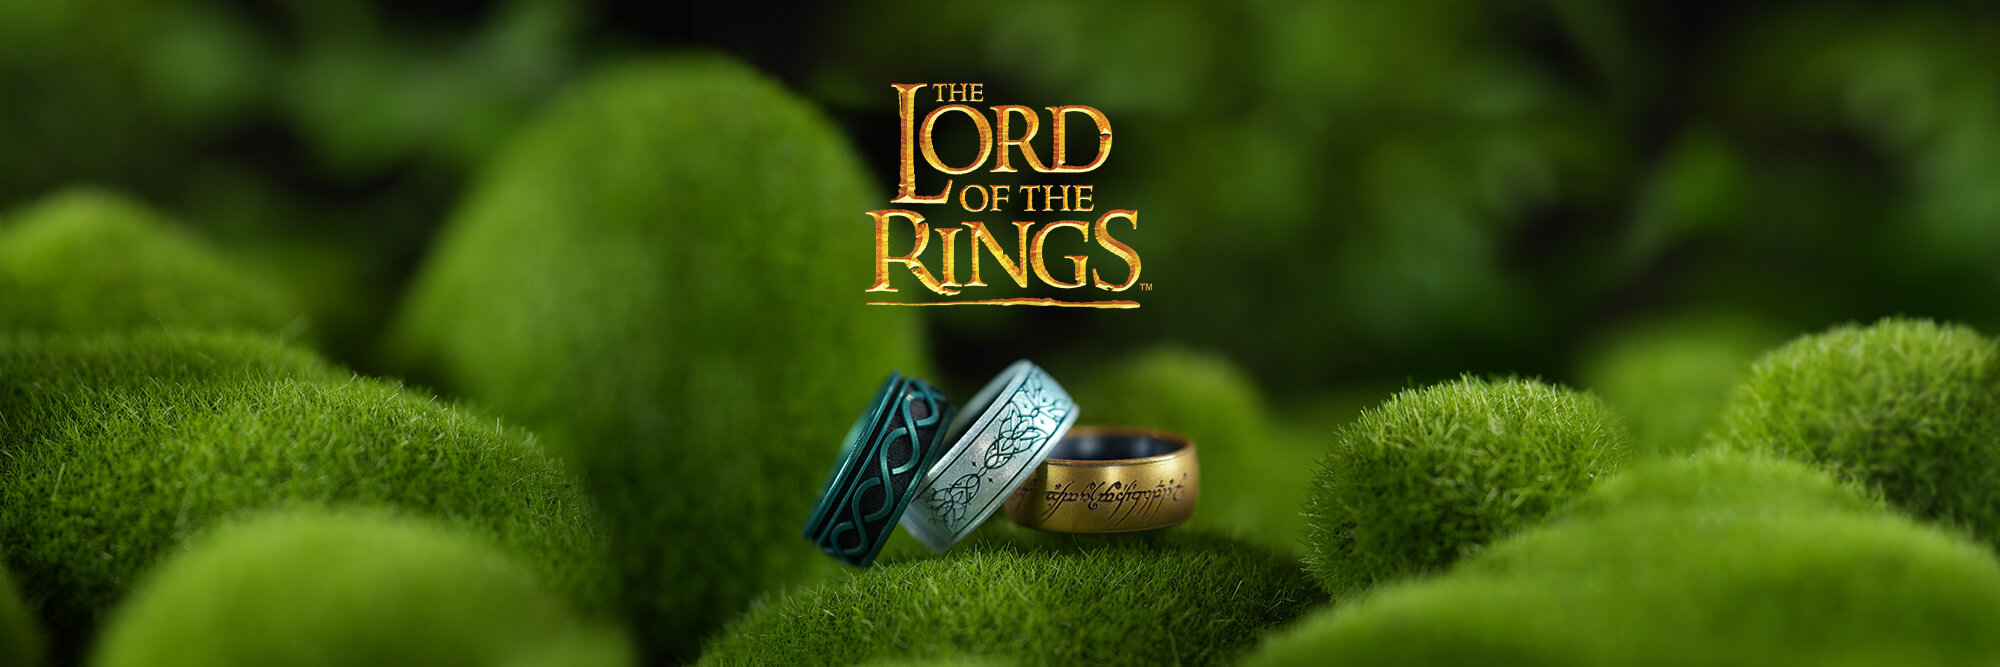 Collection the | Rings The Rings Lord Enso of